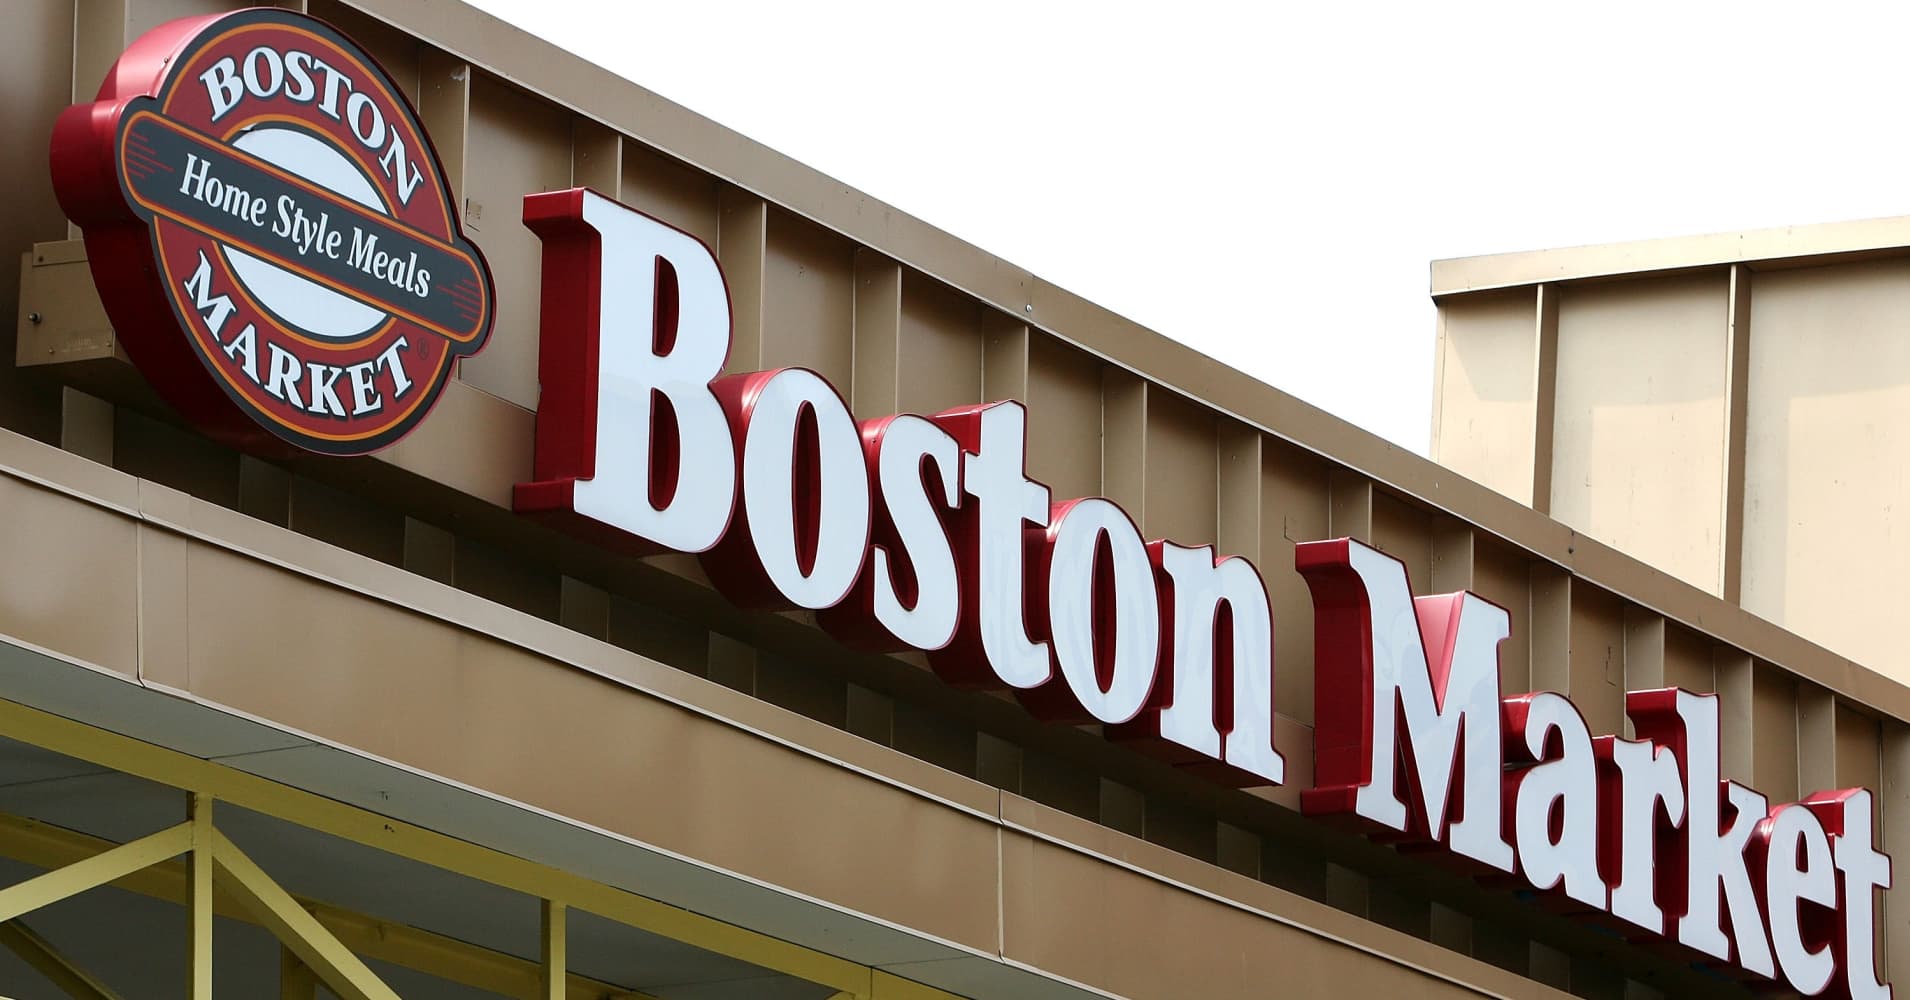 Boston Market Gets Saucy With Two New Rotisserie Flavors Joining The Ranks; One Brings The Heat